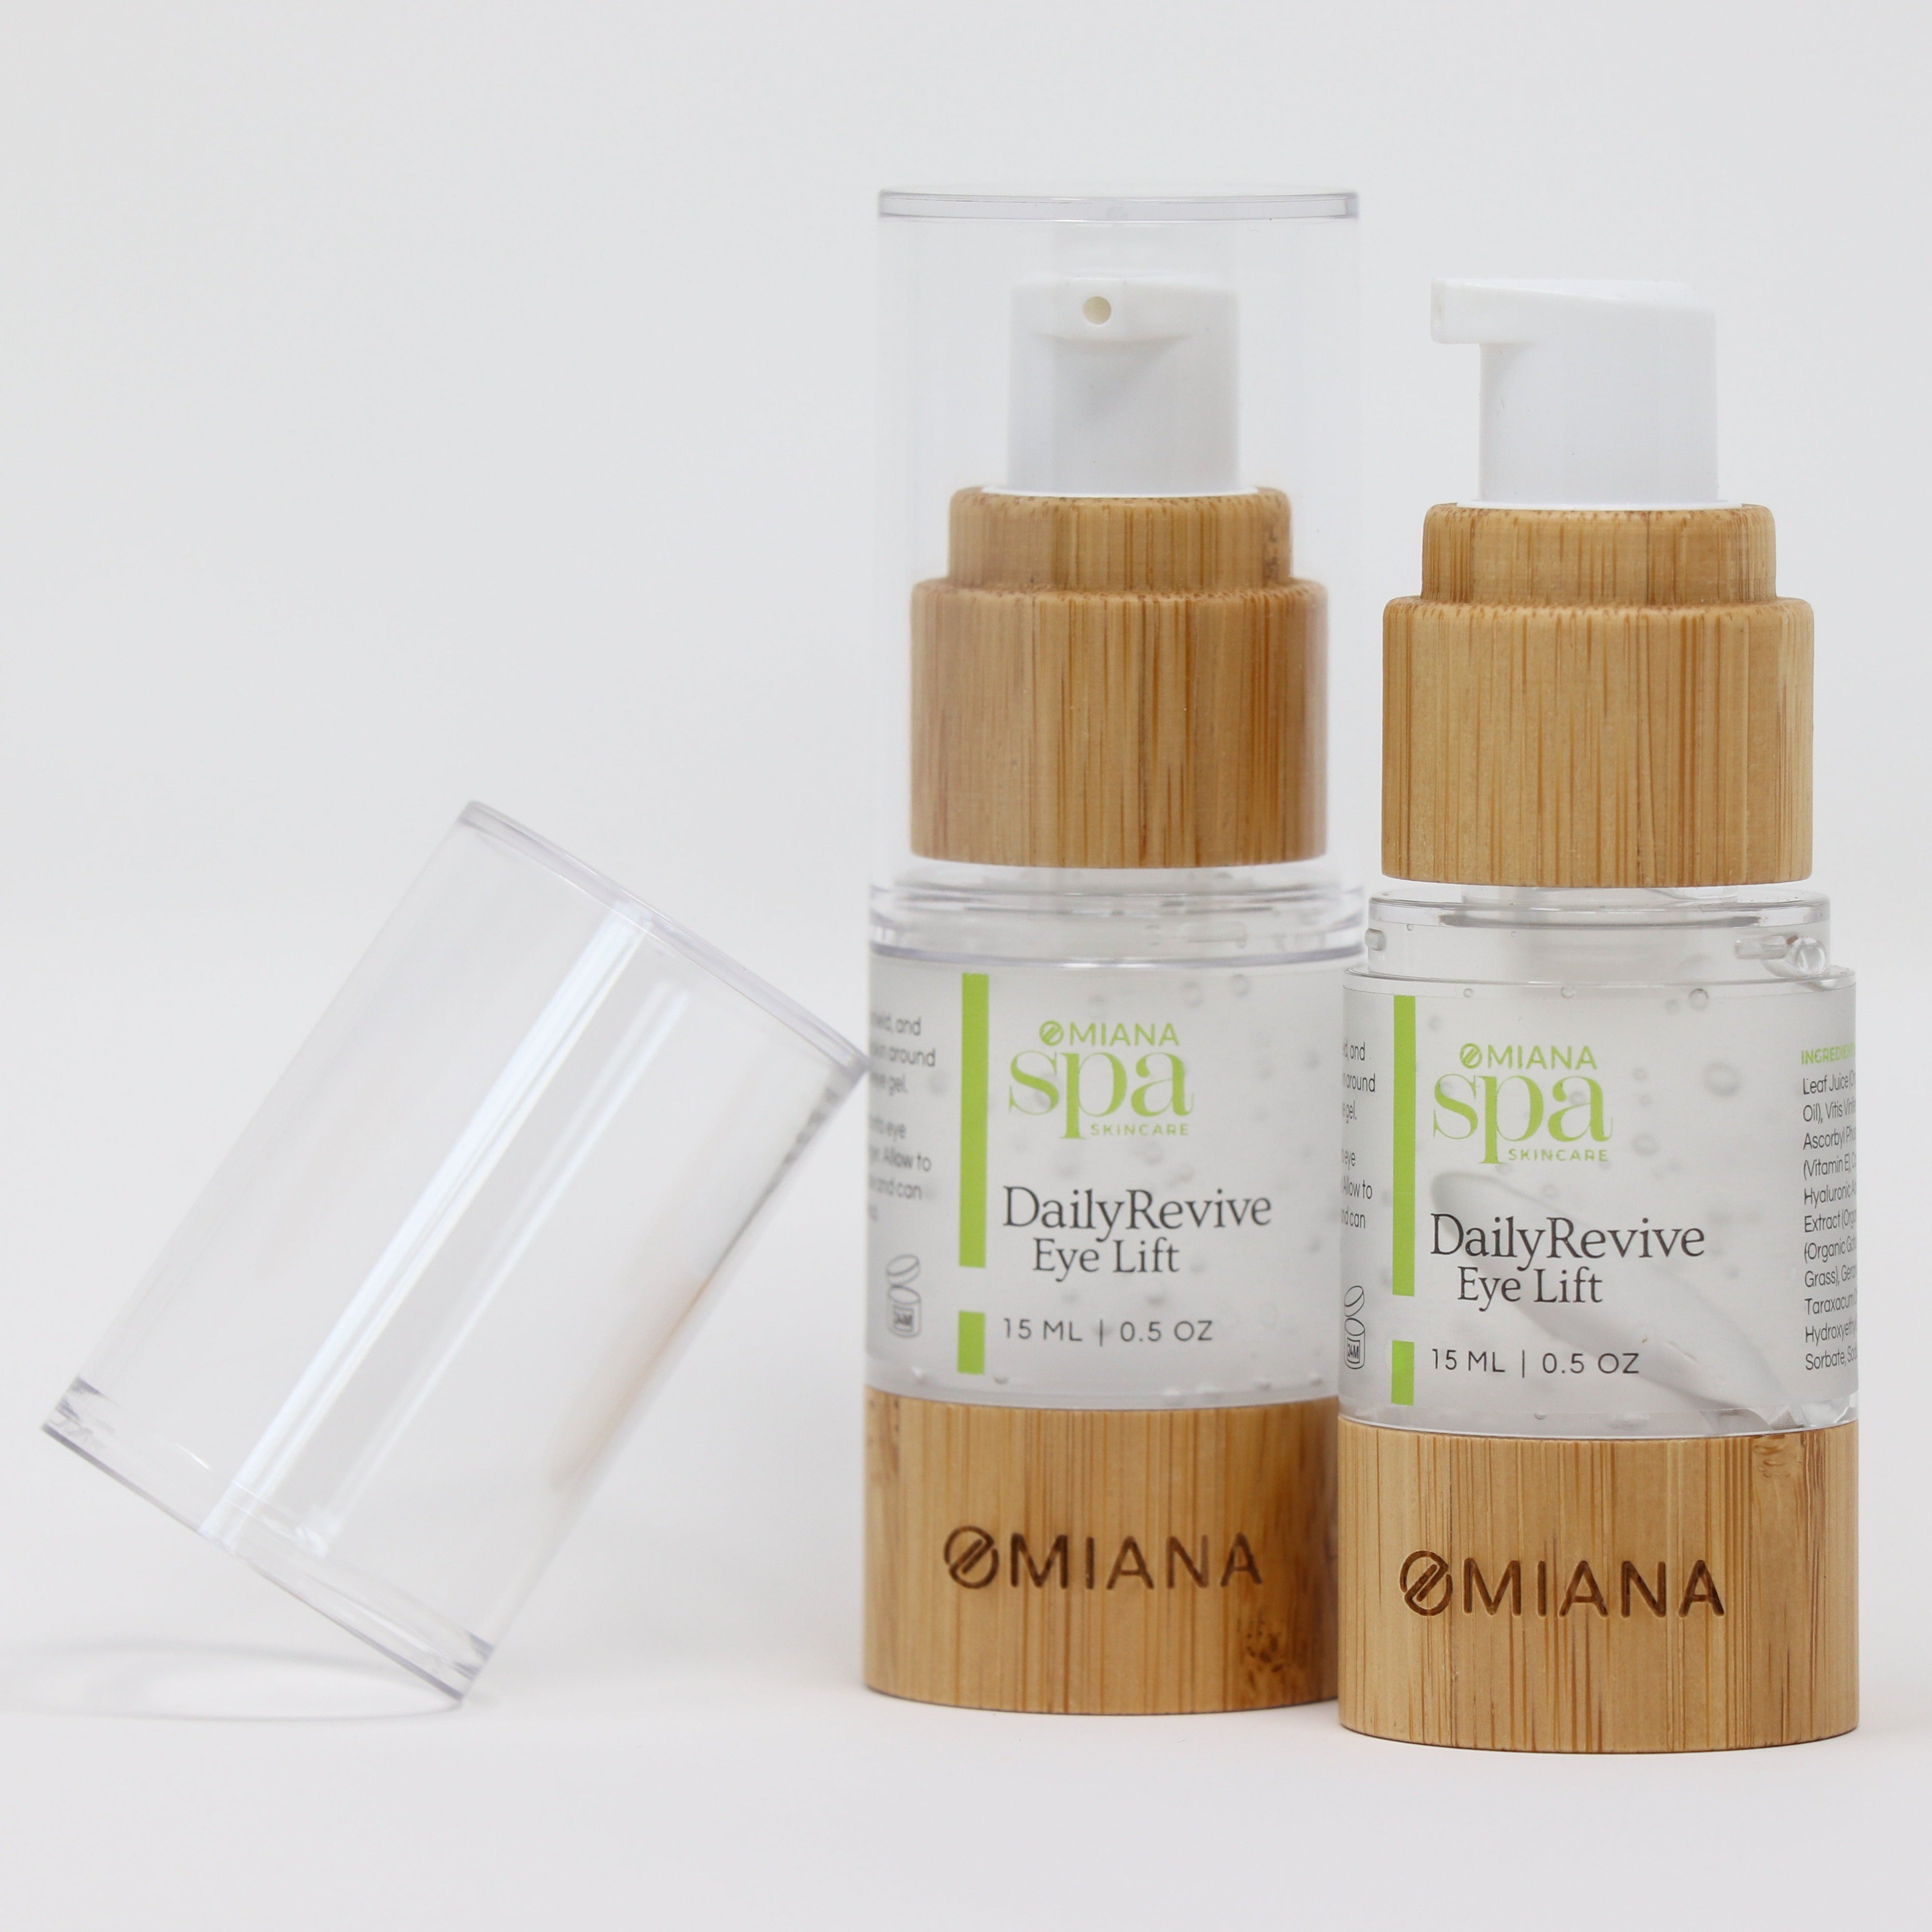 DailyRevive Eye Lift - 100% Free From GMOs, Toxins, Artificial Fragrances, & More by Omiana